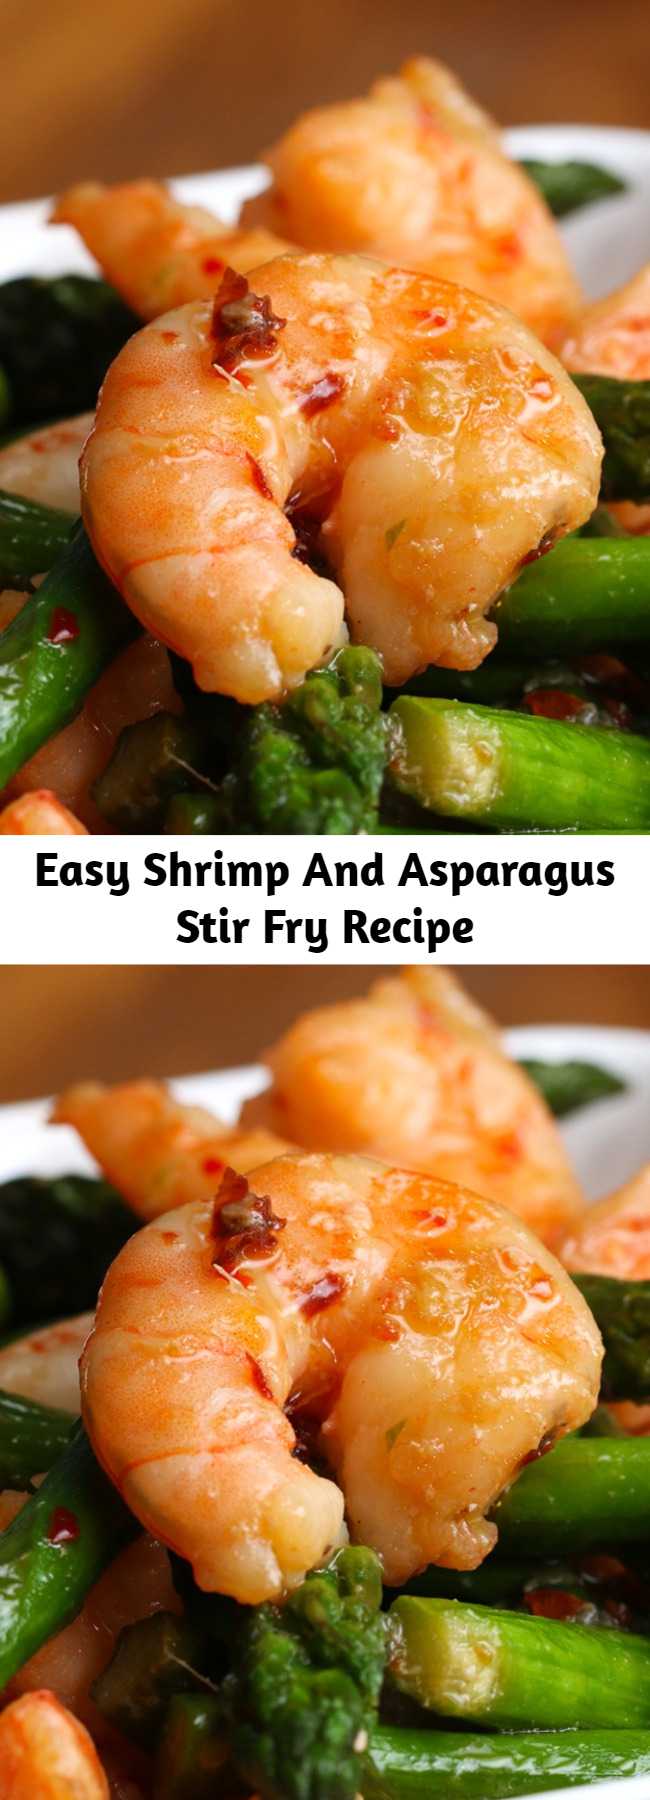 Easy Shrimp And Asparagus Stir Fry Recipe (Under 300 Calories) - SO GOOD! Quick, easy, simple and tasty.